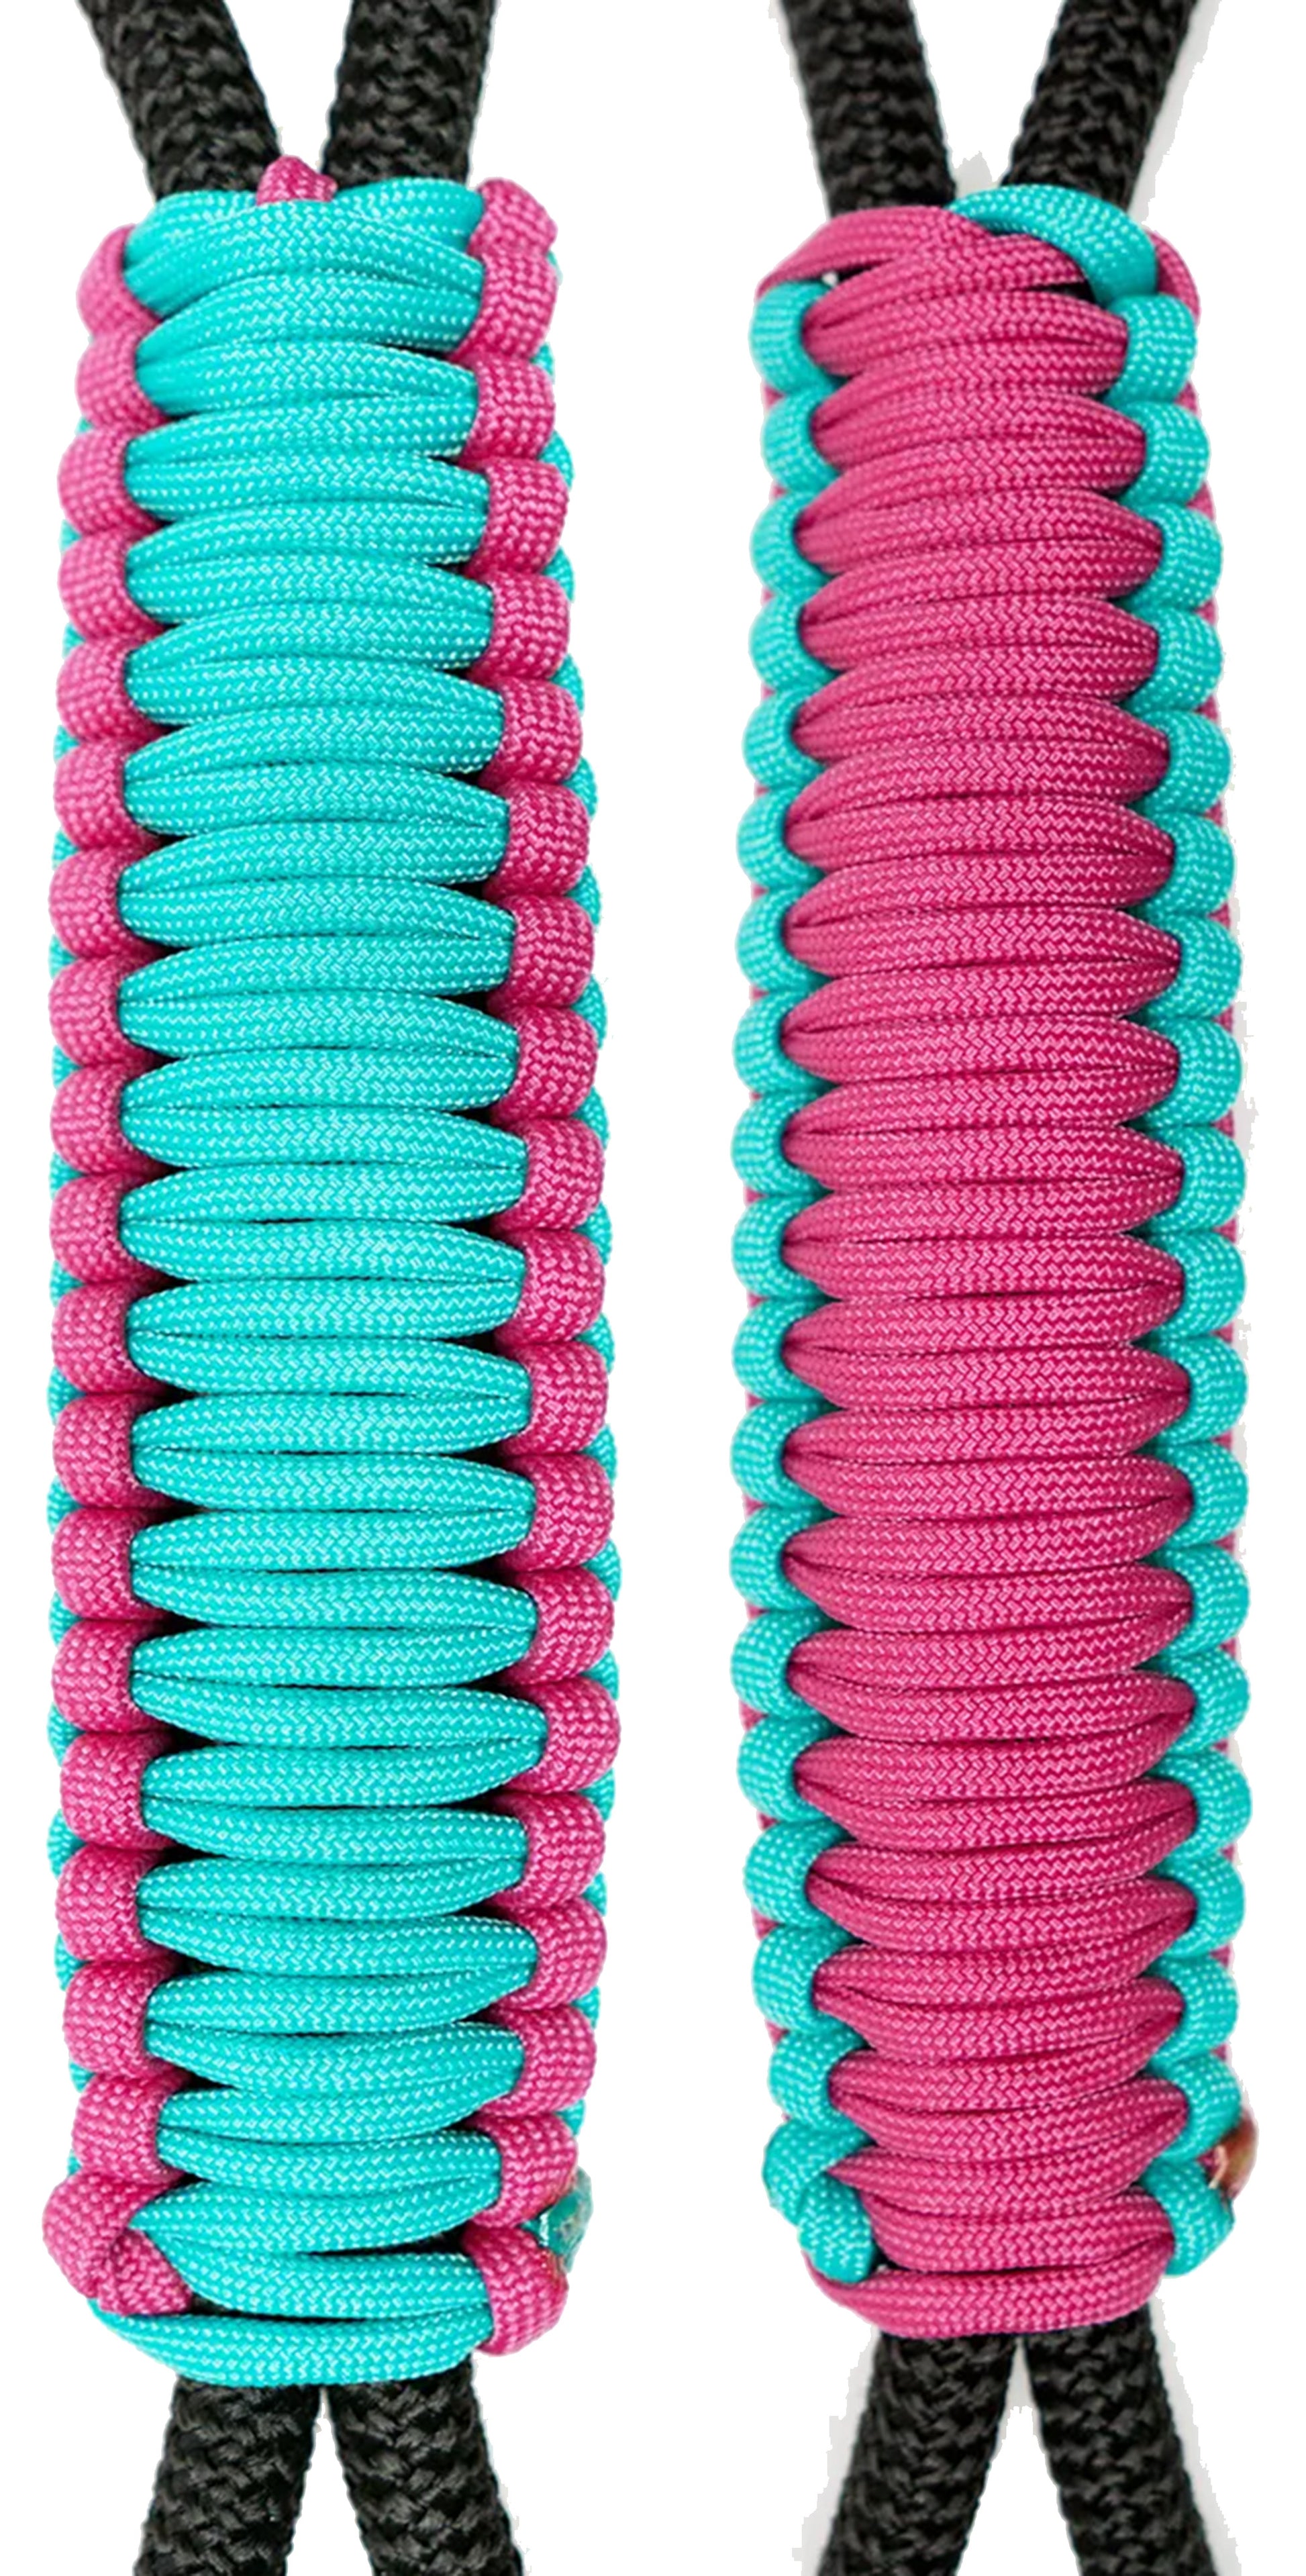 Teal & Fuchsia C017C010 - Paracord Handmade Handles for Stainless Steel Tumblers - Made in USA!